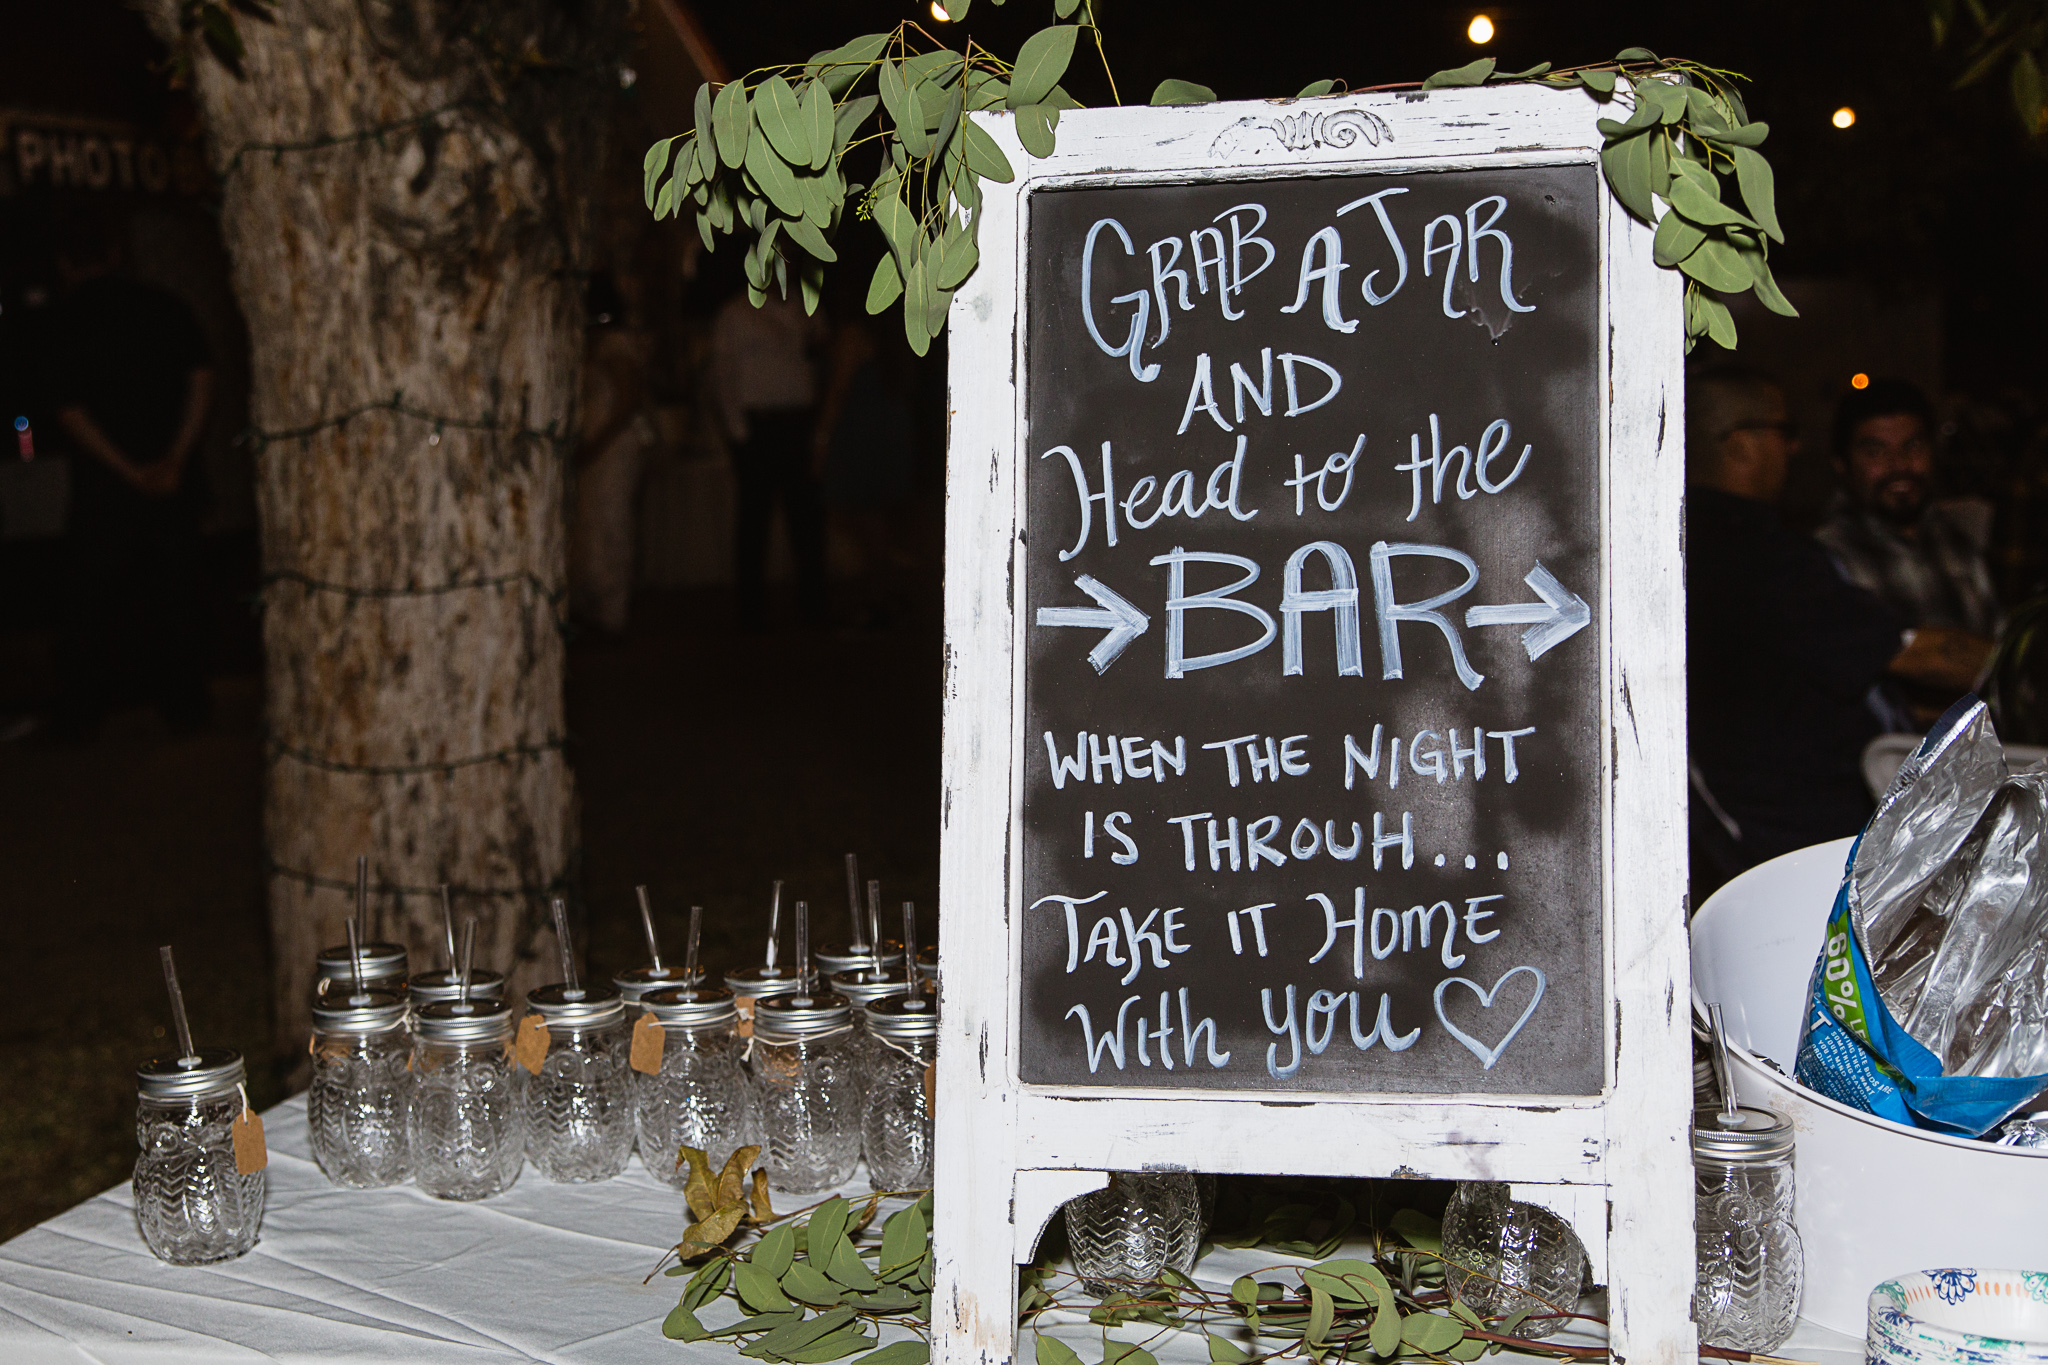 Mason jar wedding favors with a "Grab a jar and head to the bar" rustic sign by PMA Photography.